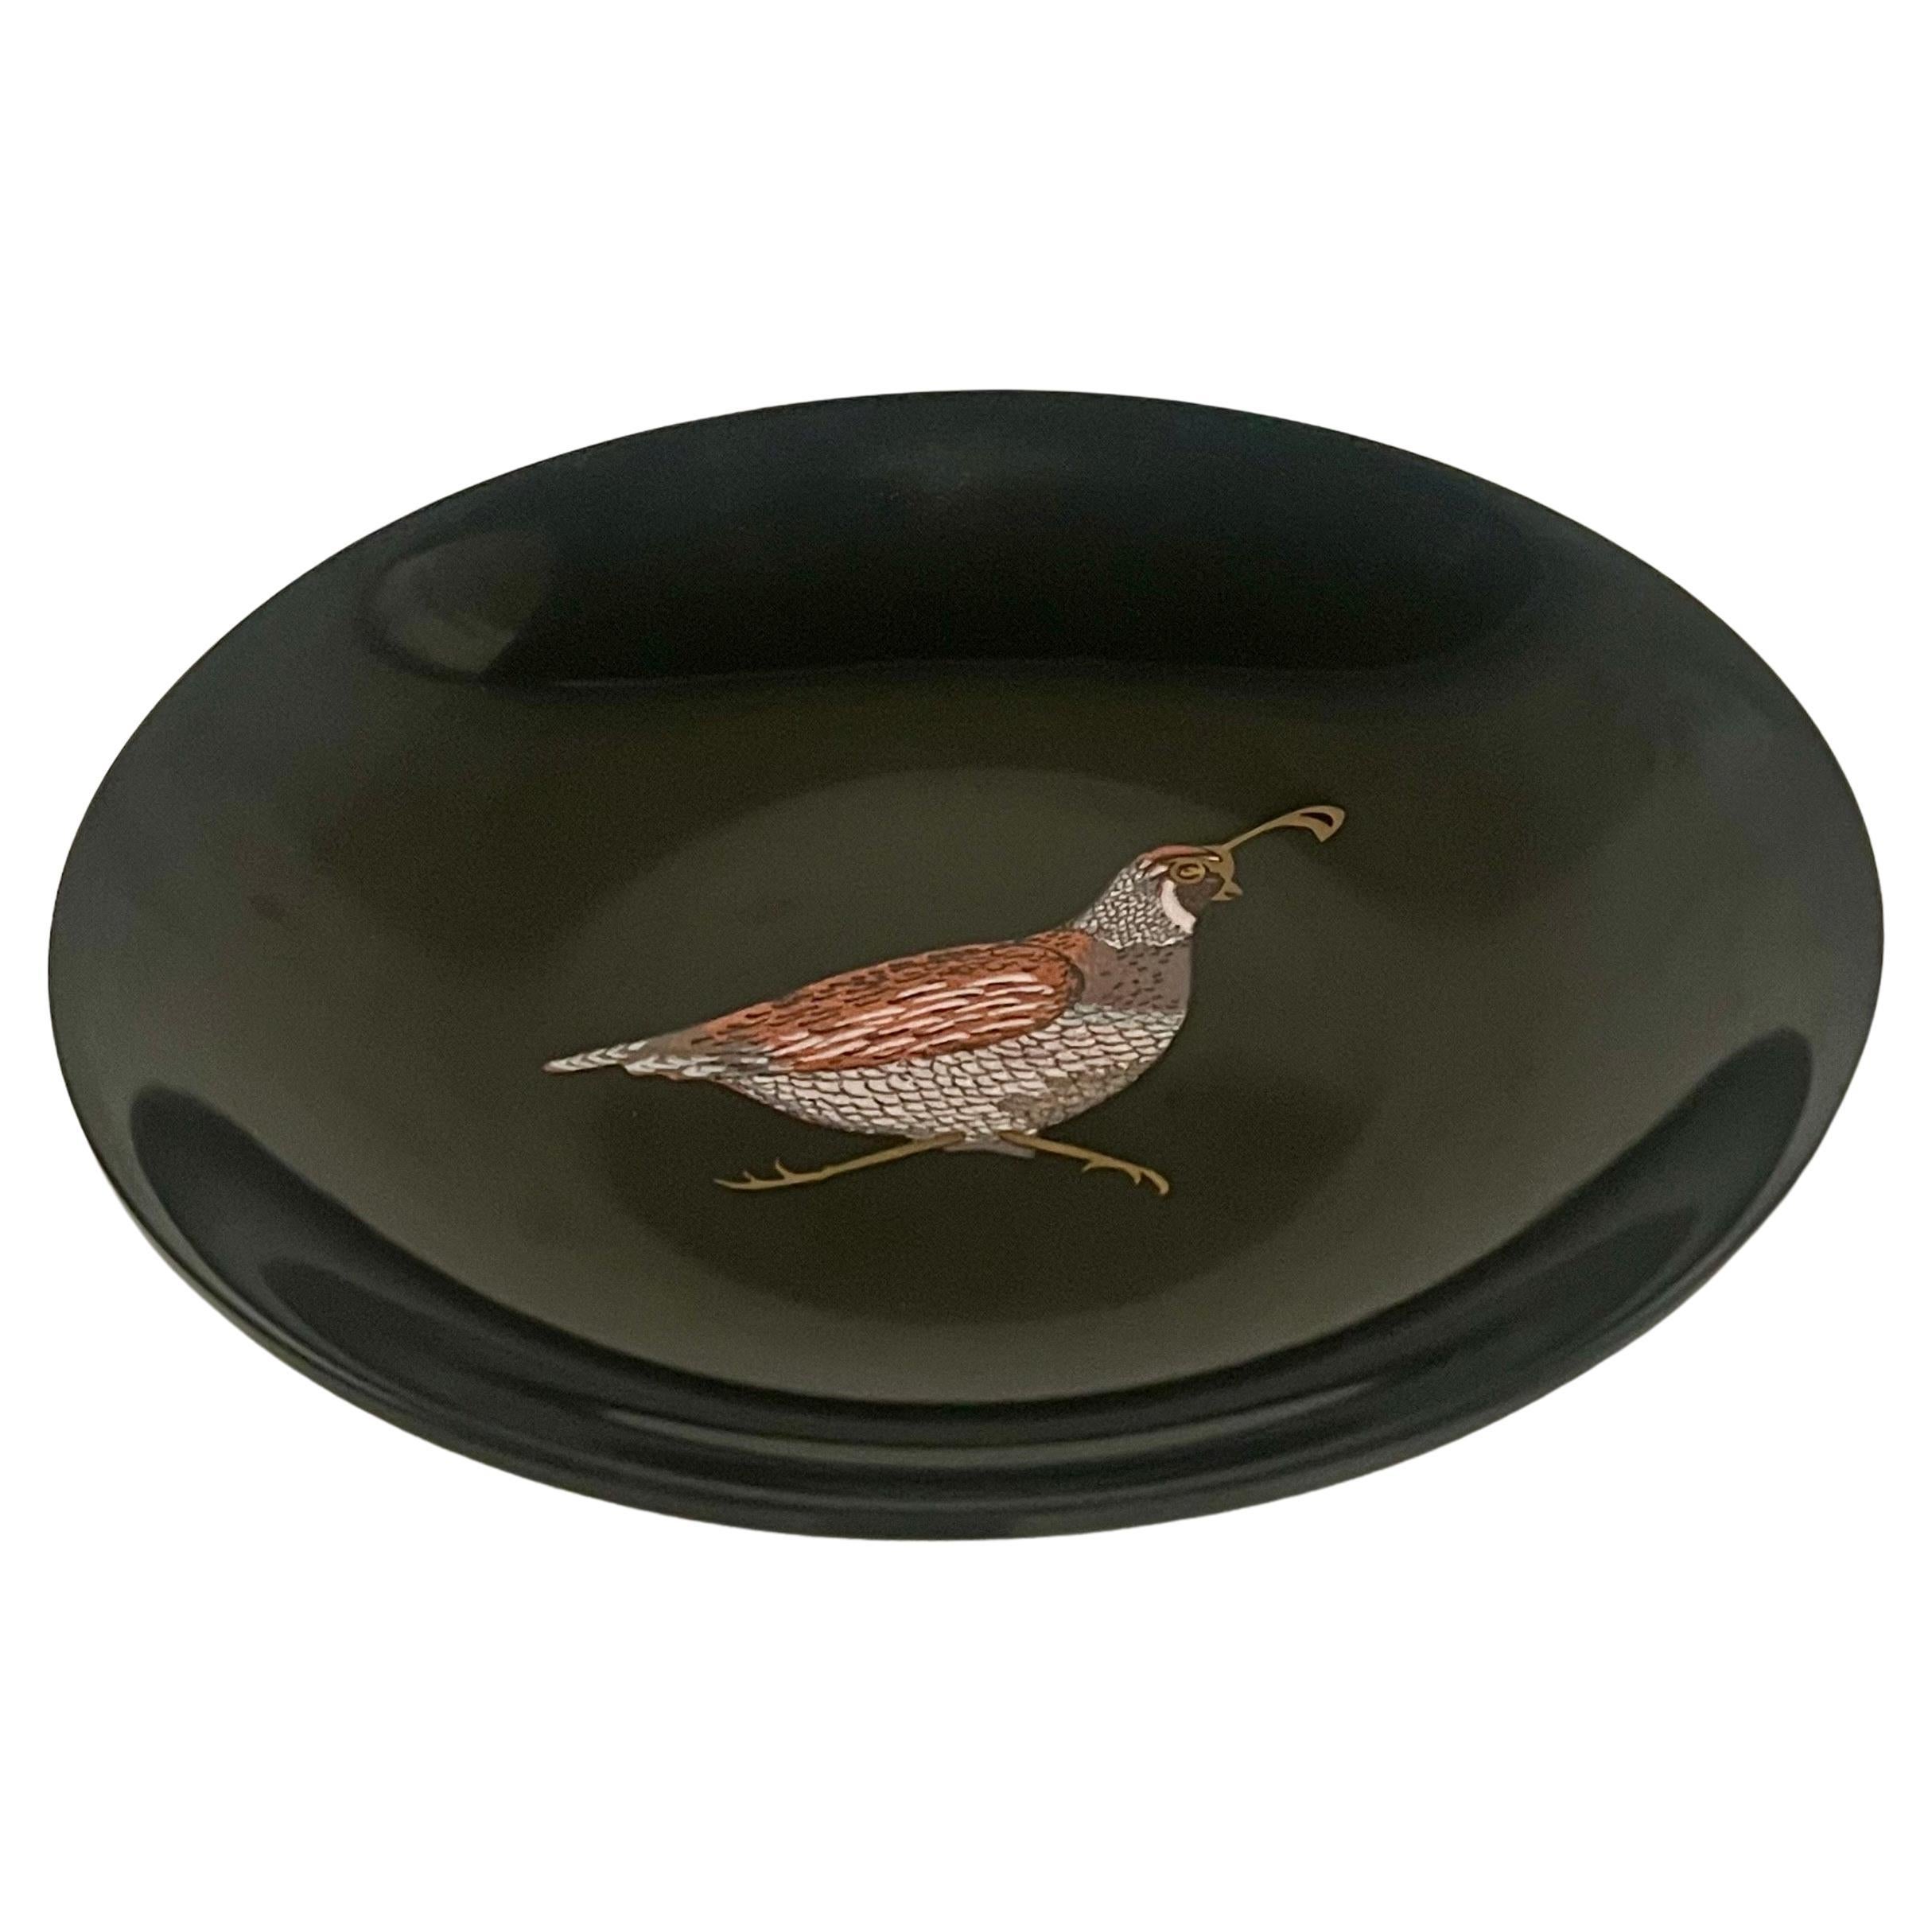 Beautiful super cool inlaid wood Quail low bowl catch-it-all handcrafted by Couroc California, circa 1970s. .
 